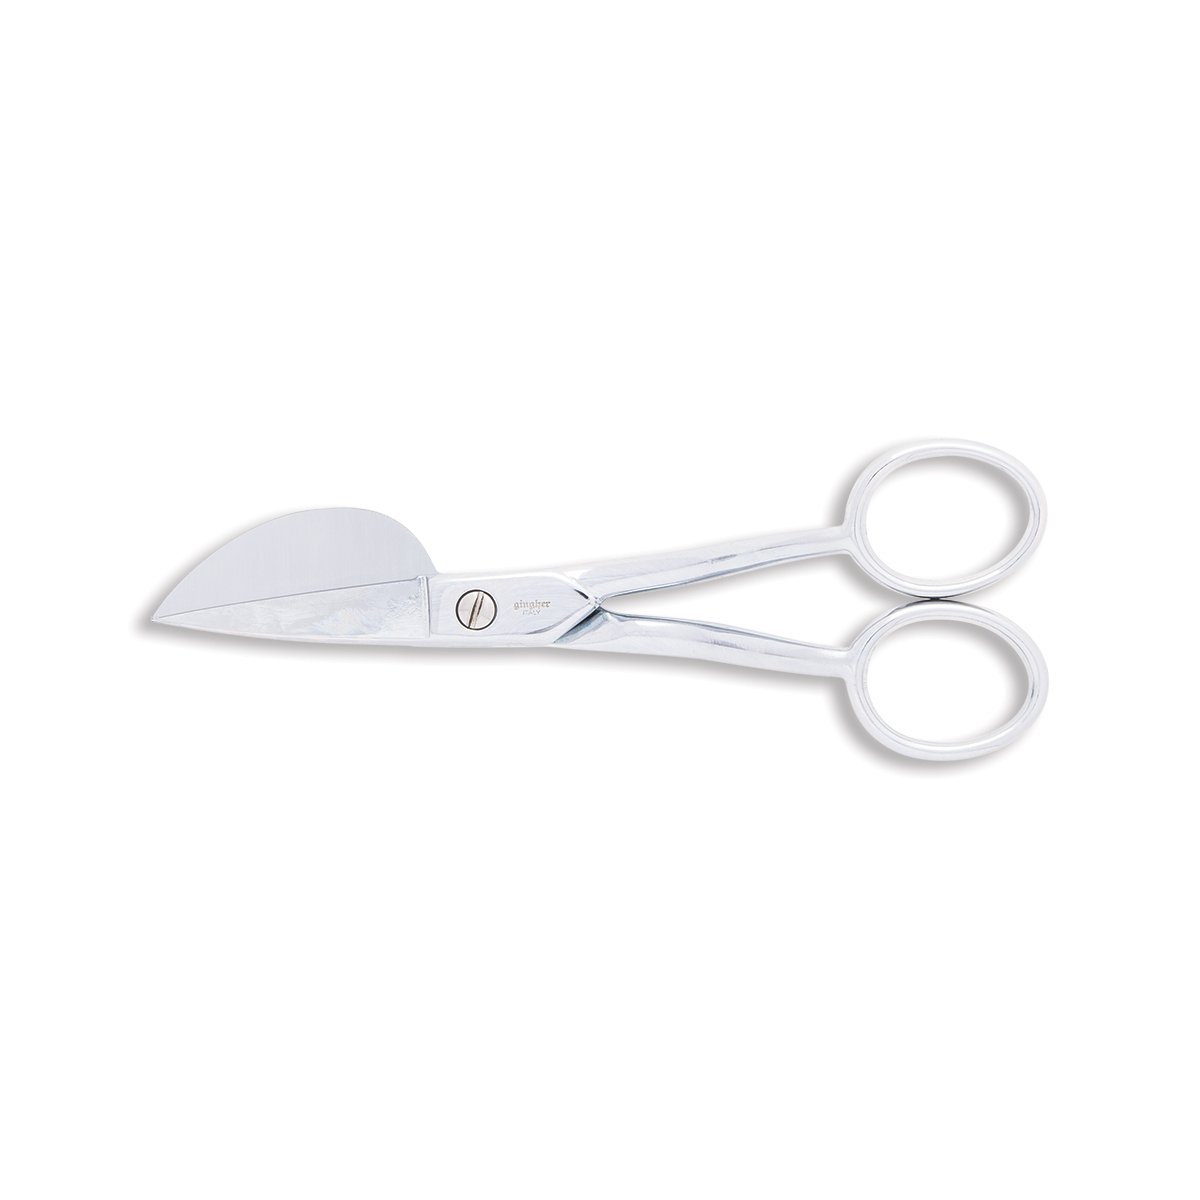 Gingher Knife Edge Left Hand Bent Trimmers - 8 - WAWAK Sewing Supplies